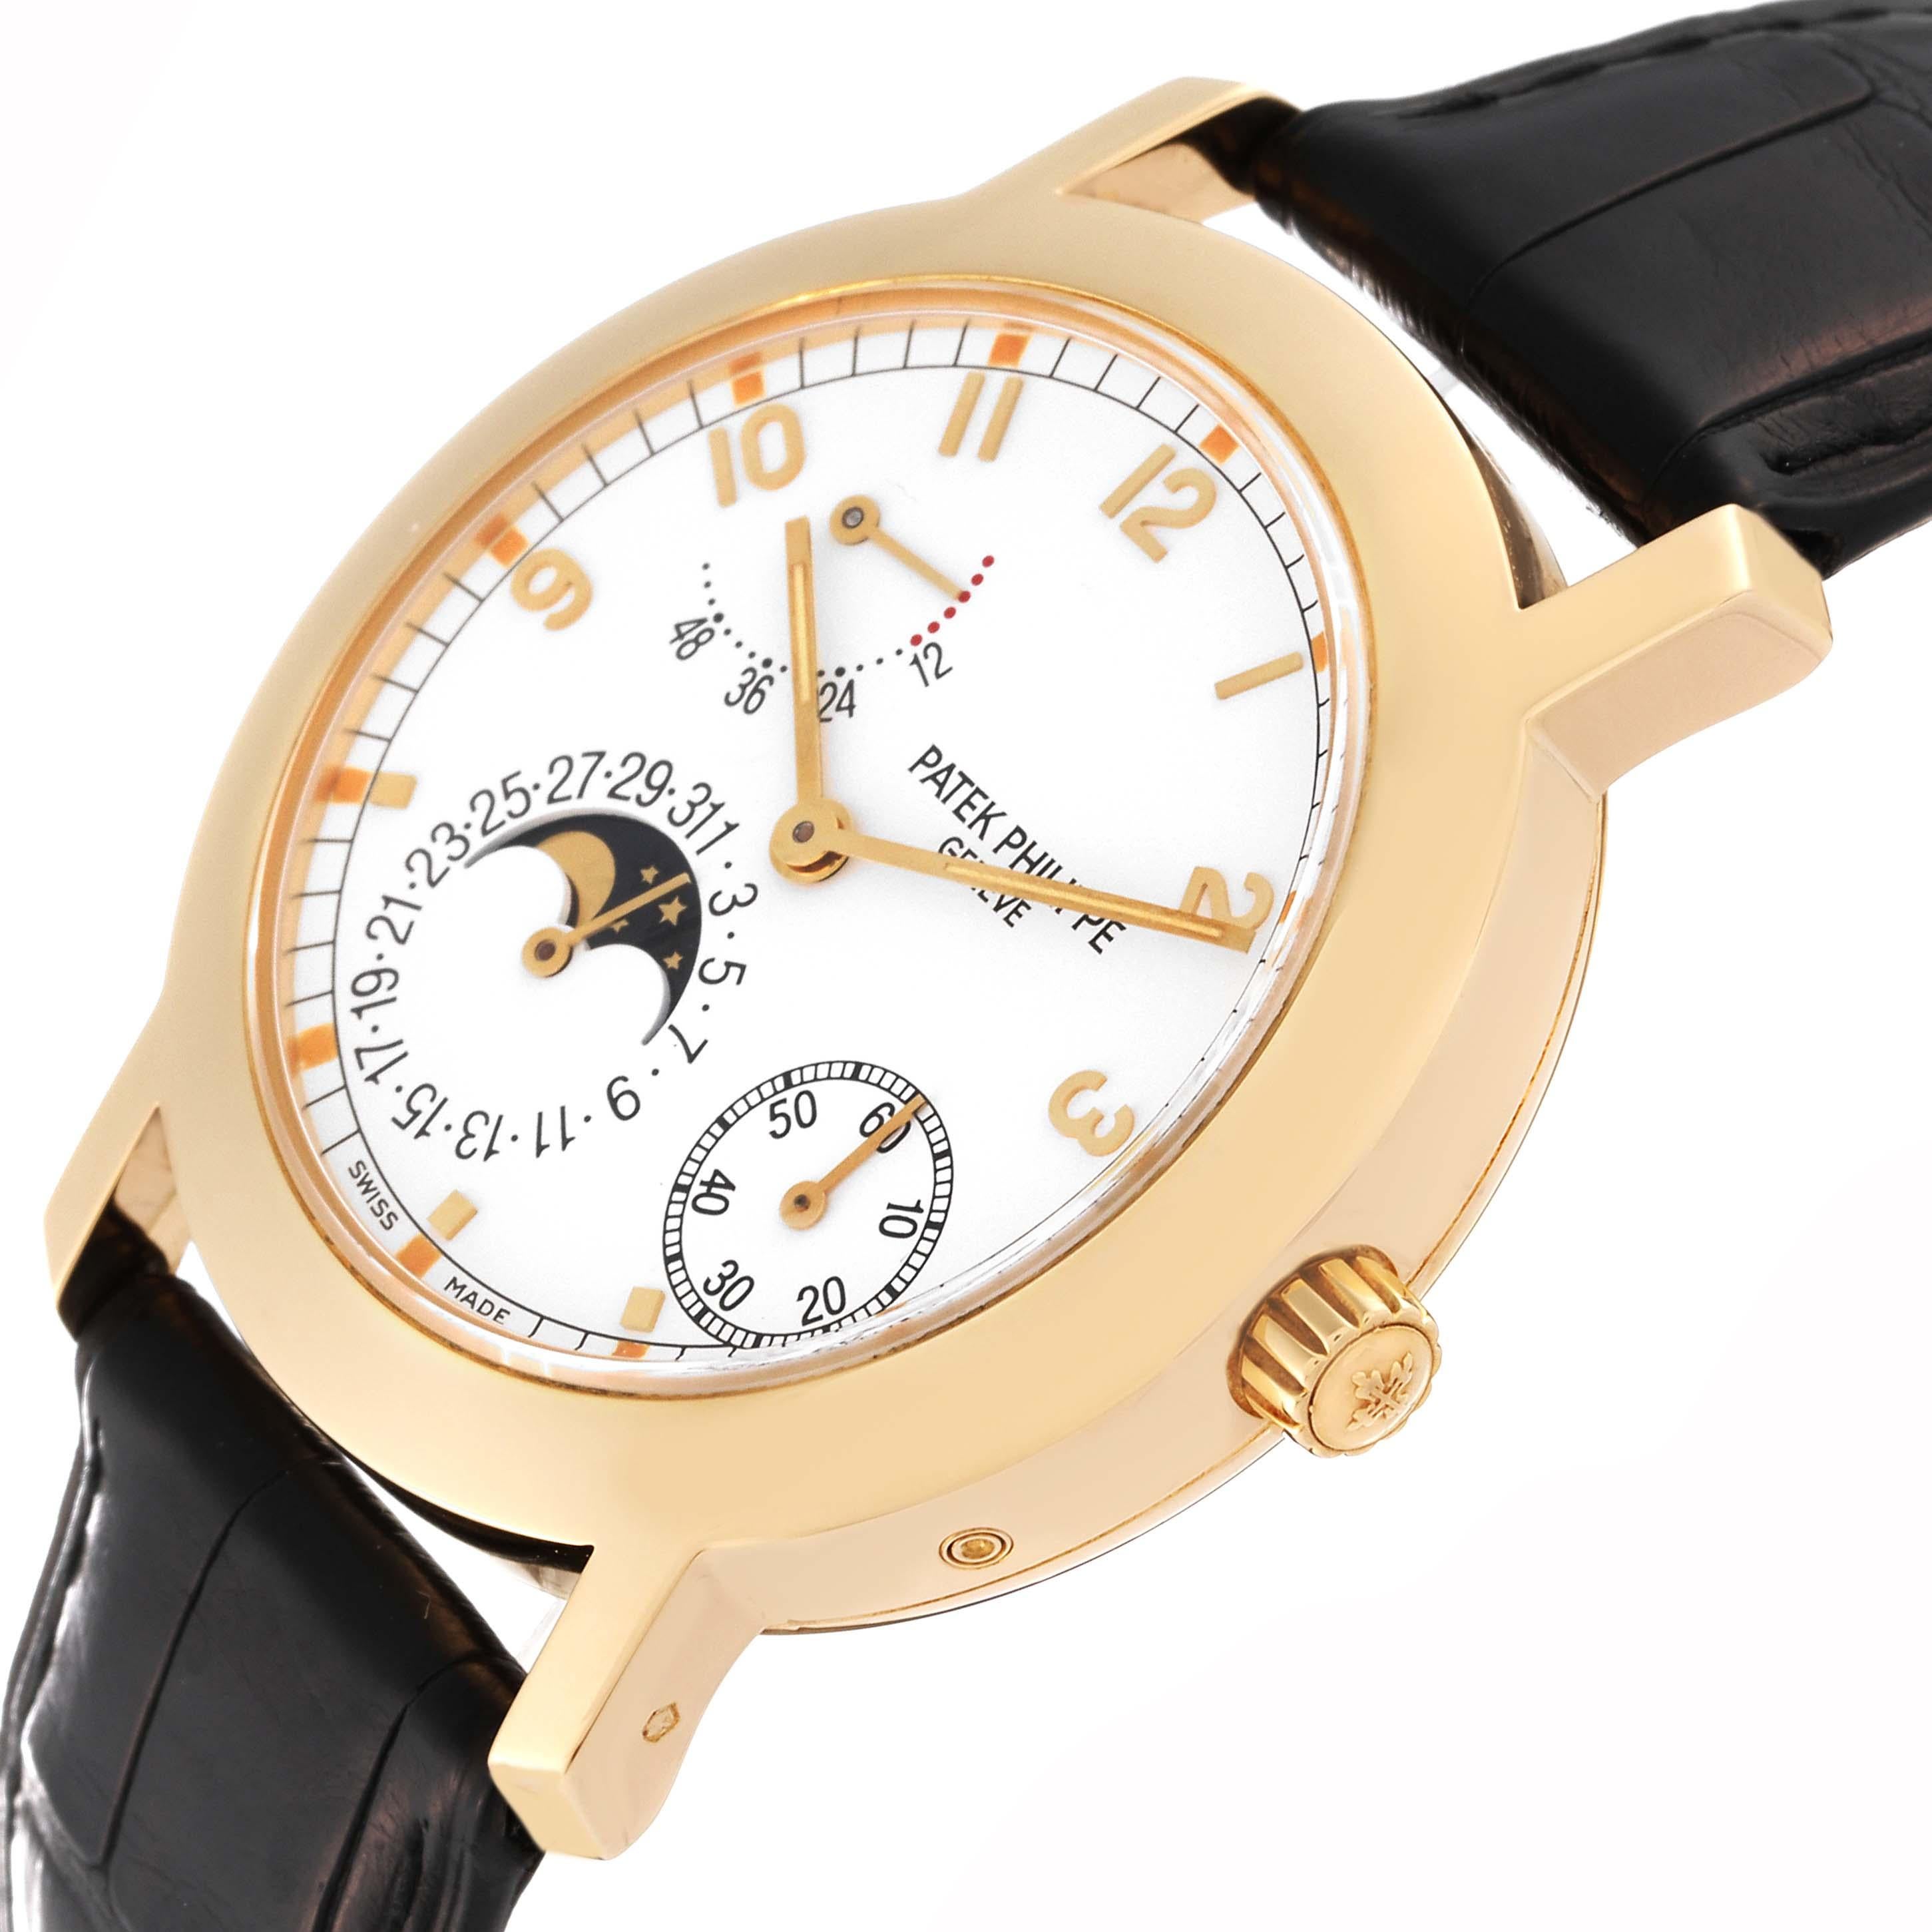 Men's Patek Philippe Moonphase Power Reserve Yellow Gold Mens Watch 5055 Box Papers